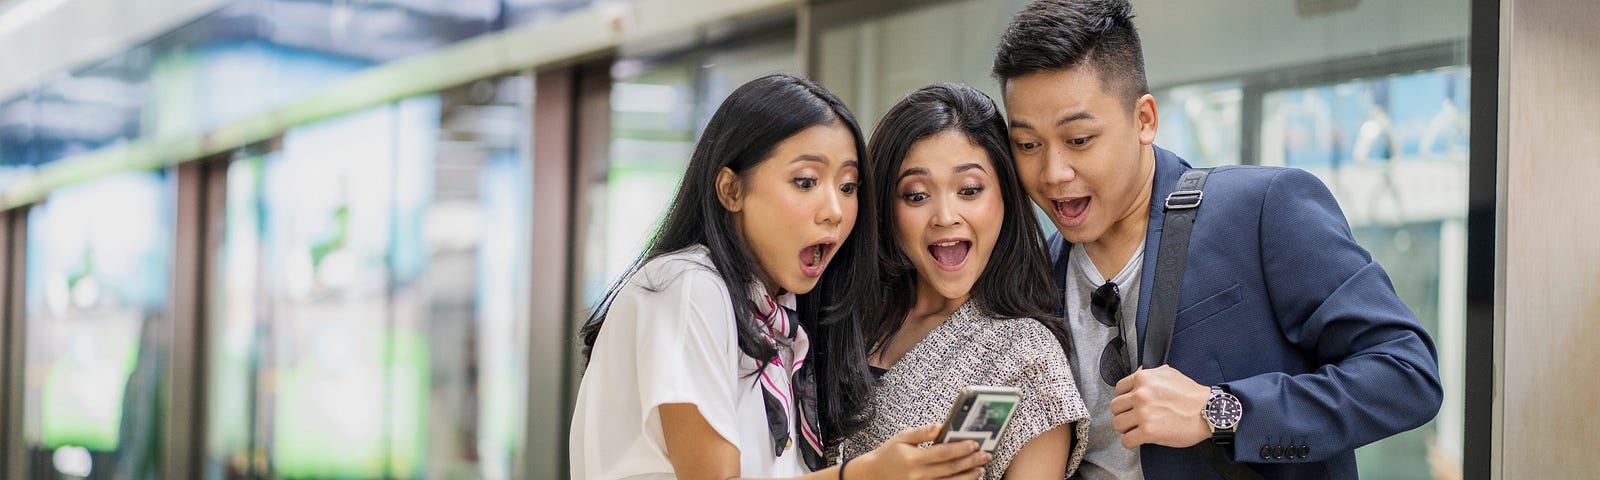 Three people staring with excitement at a phone.